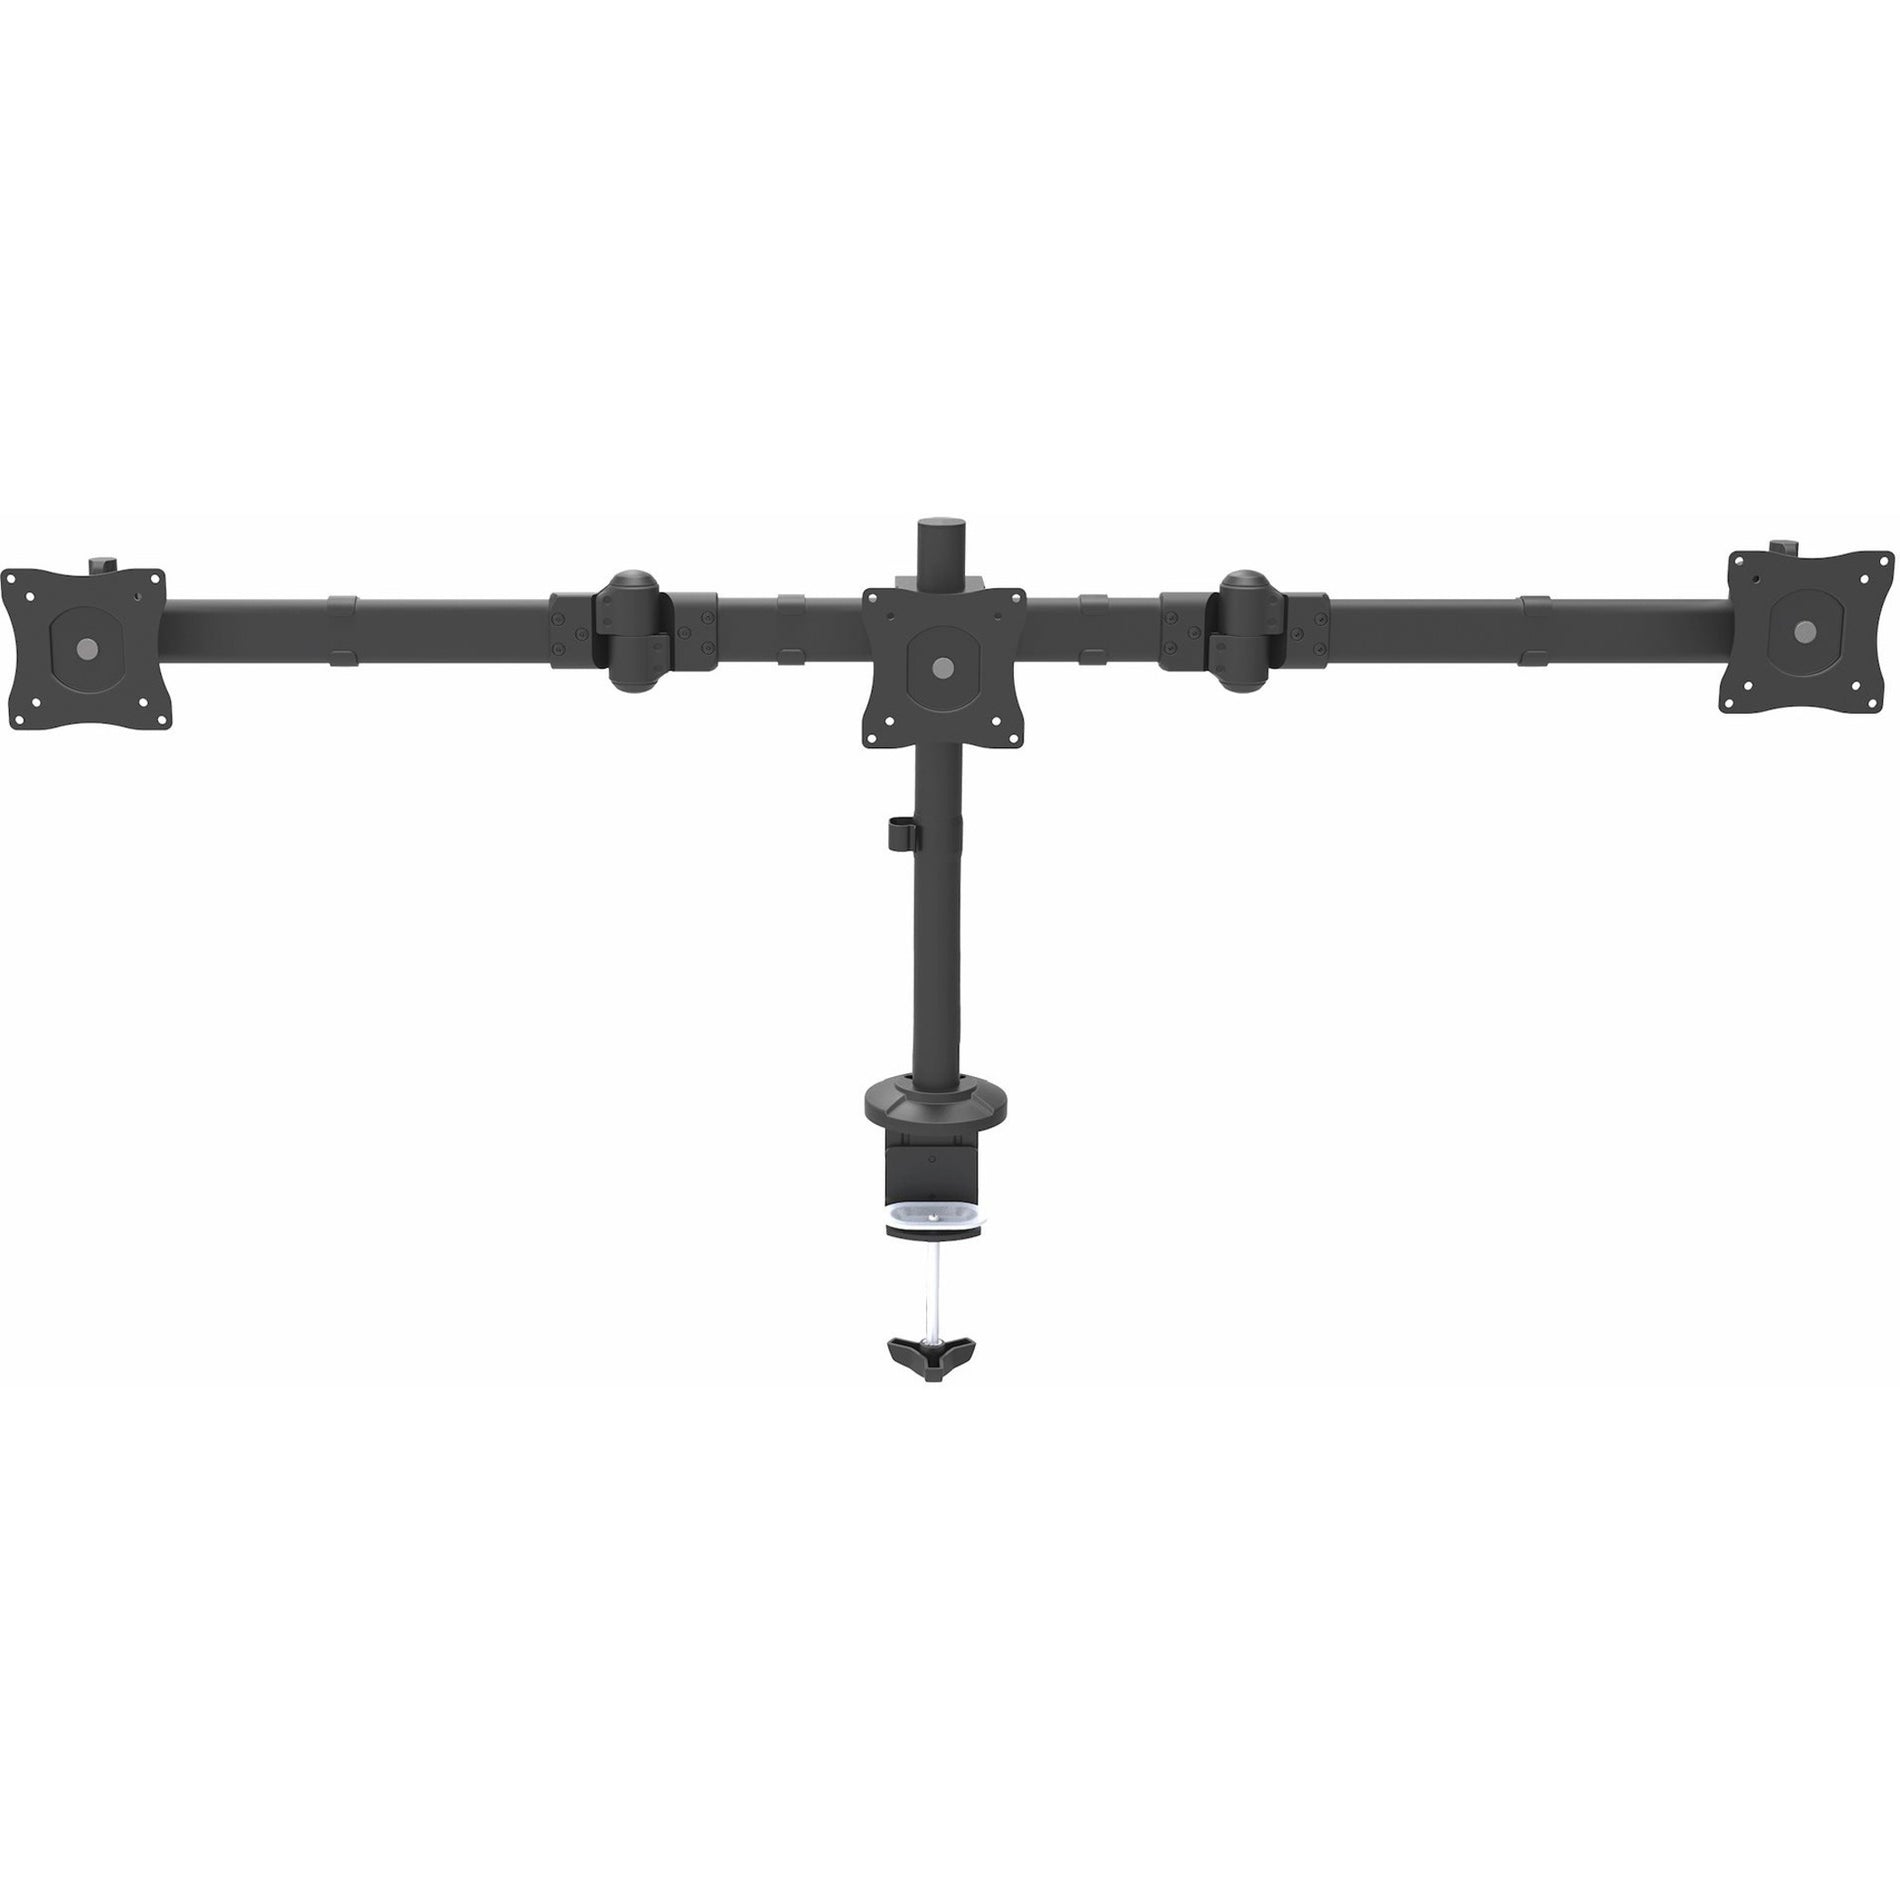 StarTech.com ARMTRIO Desk-Mount Triple Monitor Arm - Articulating, Supports 3 Monitors up to 24", Steel, Tool-less Height Adjustment